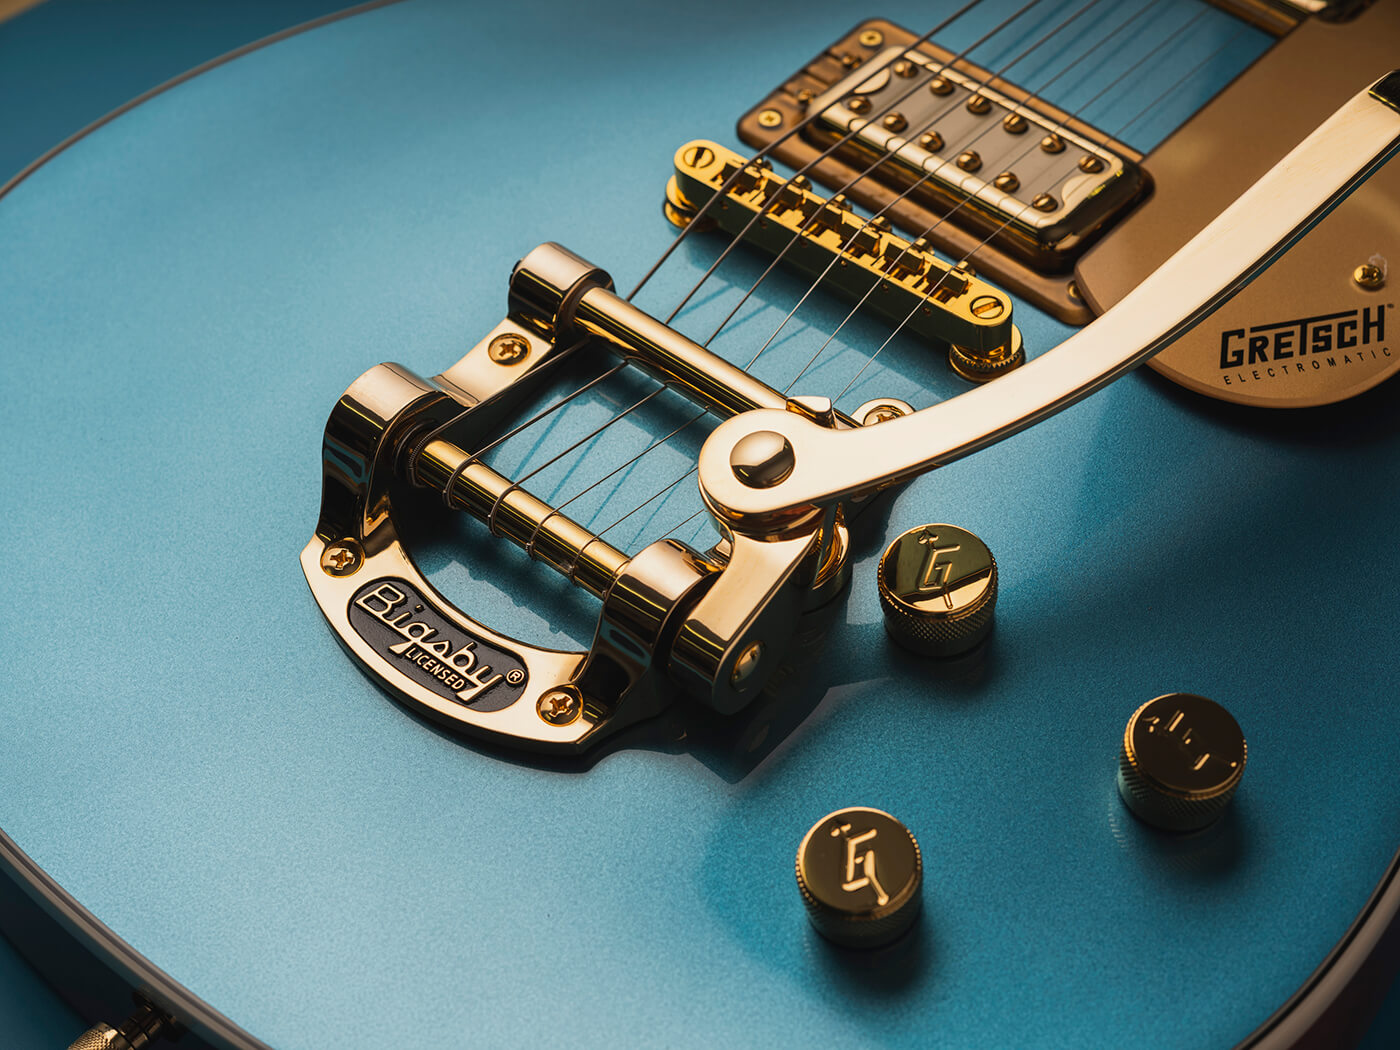 Gold hardware on the Electromatic Pristine Jet, photo by Adam Gasson